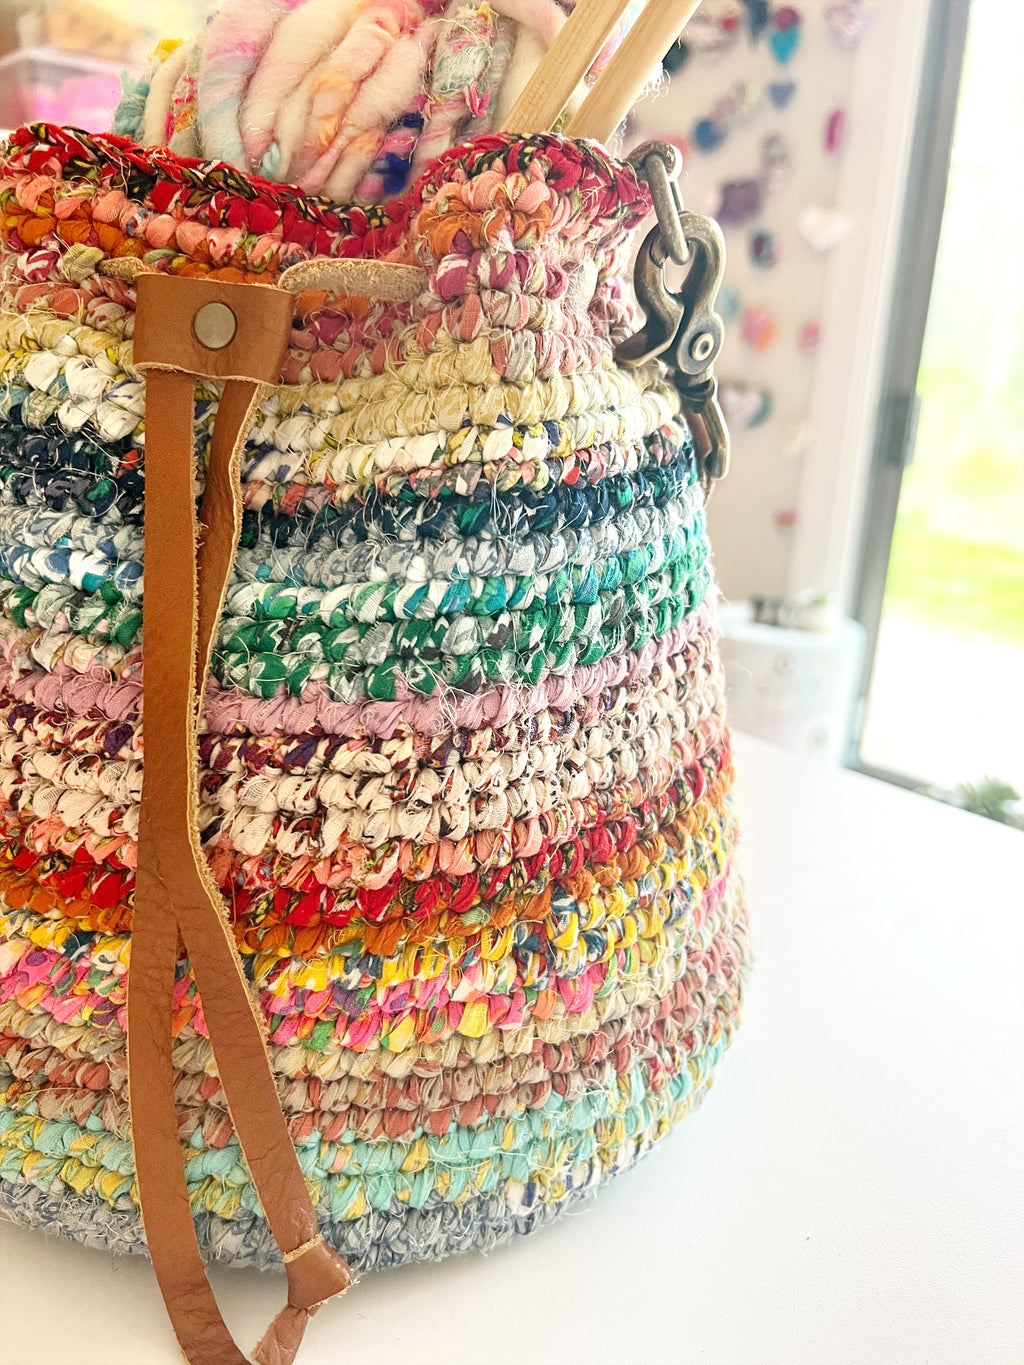 How to style my bucket bag